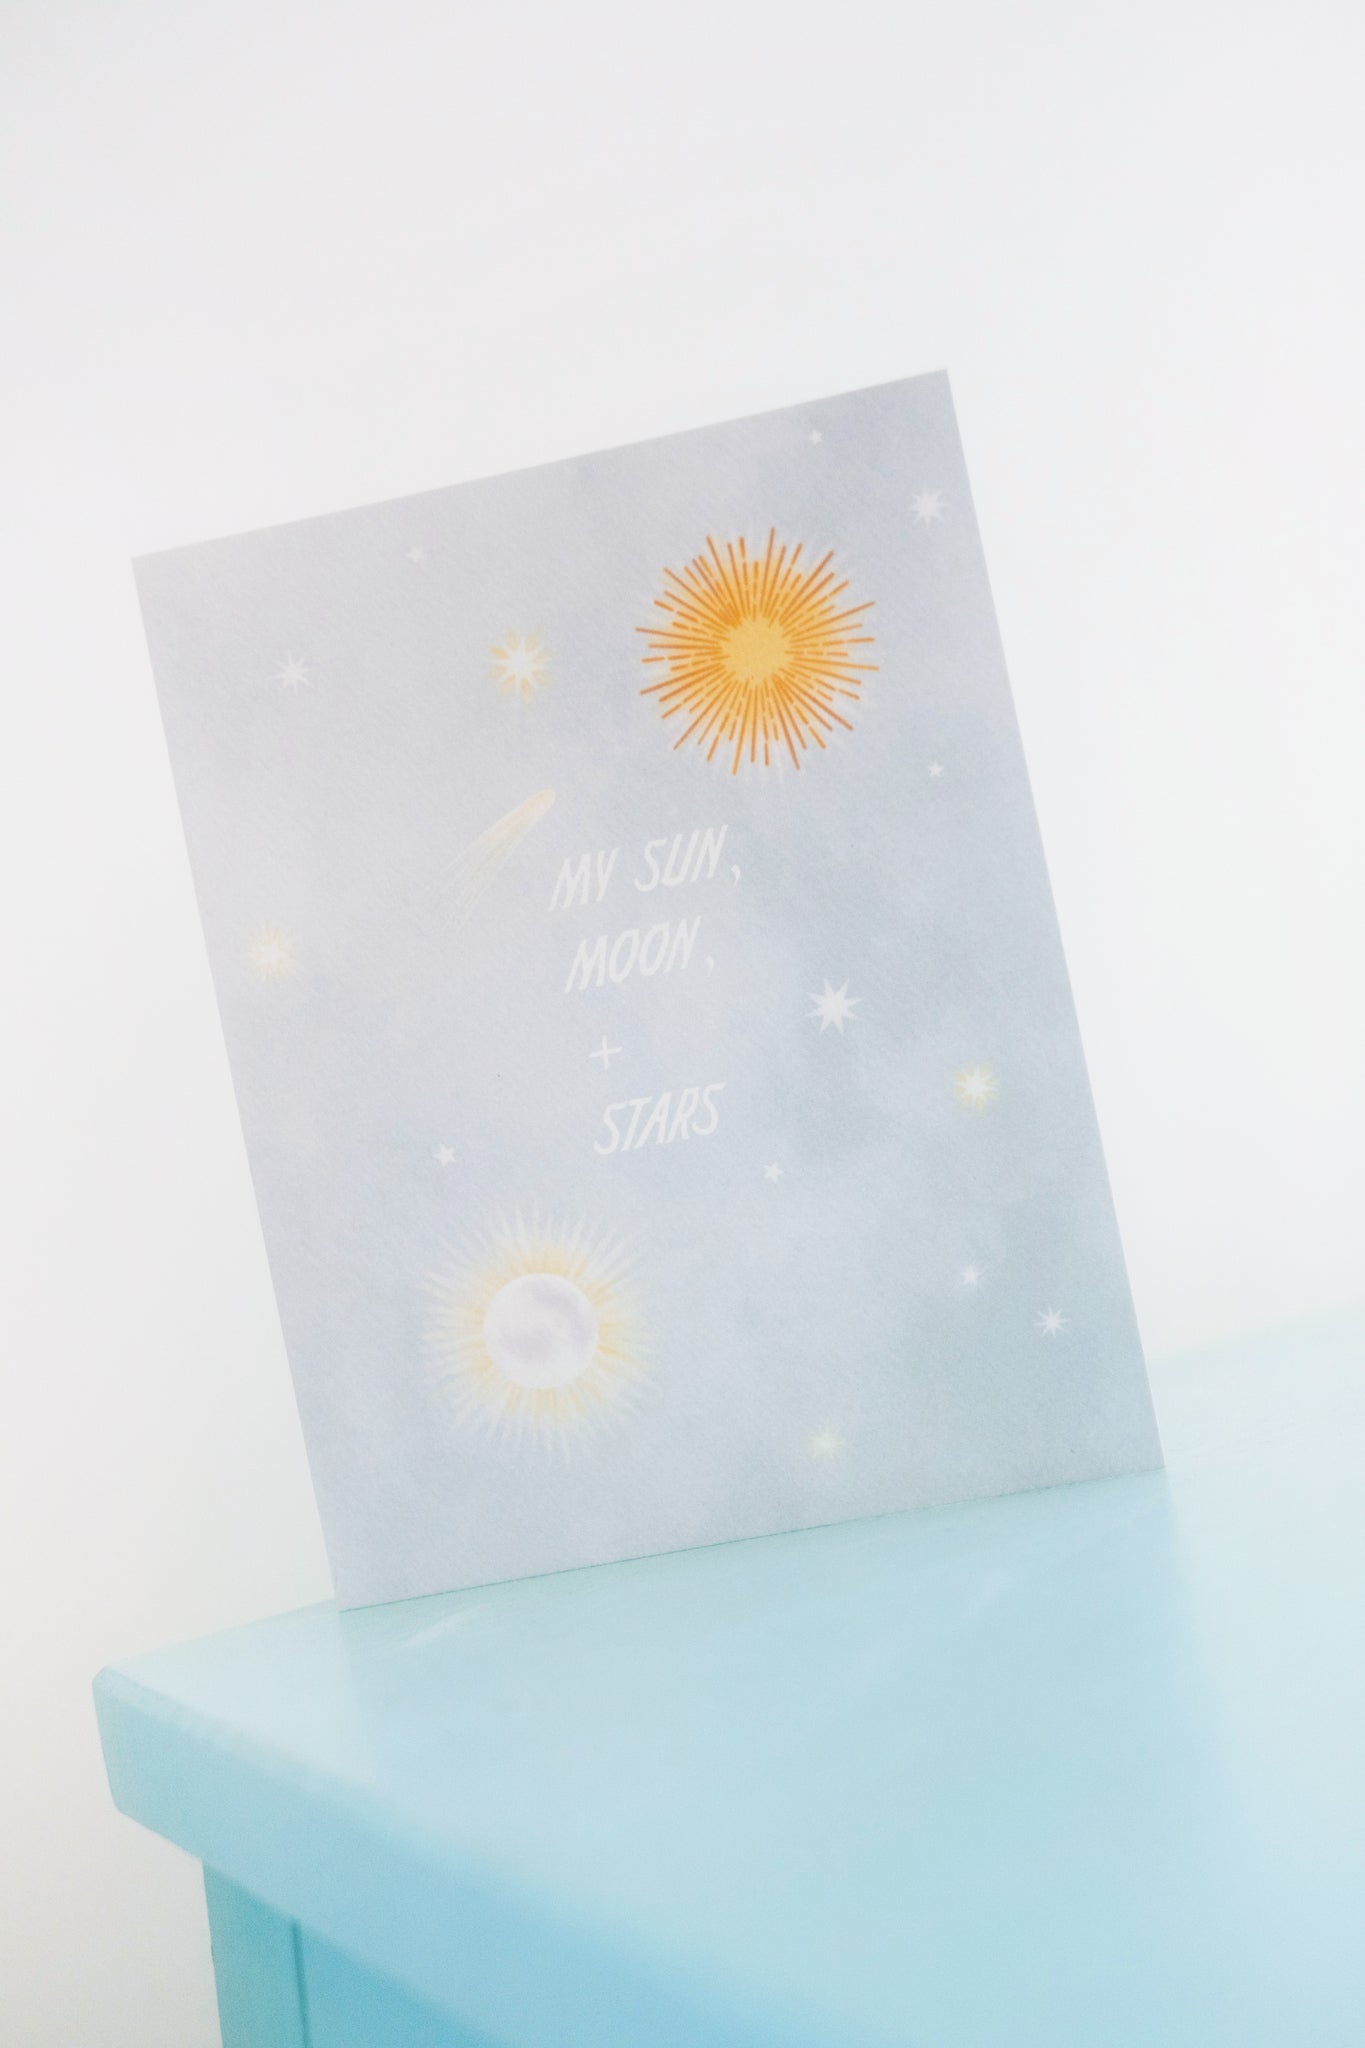 Blue sky with sun, moon, stars and text that reads &quot;My Sun, Moon, + Stars.&quot; Shown on blue shelf with white background.